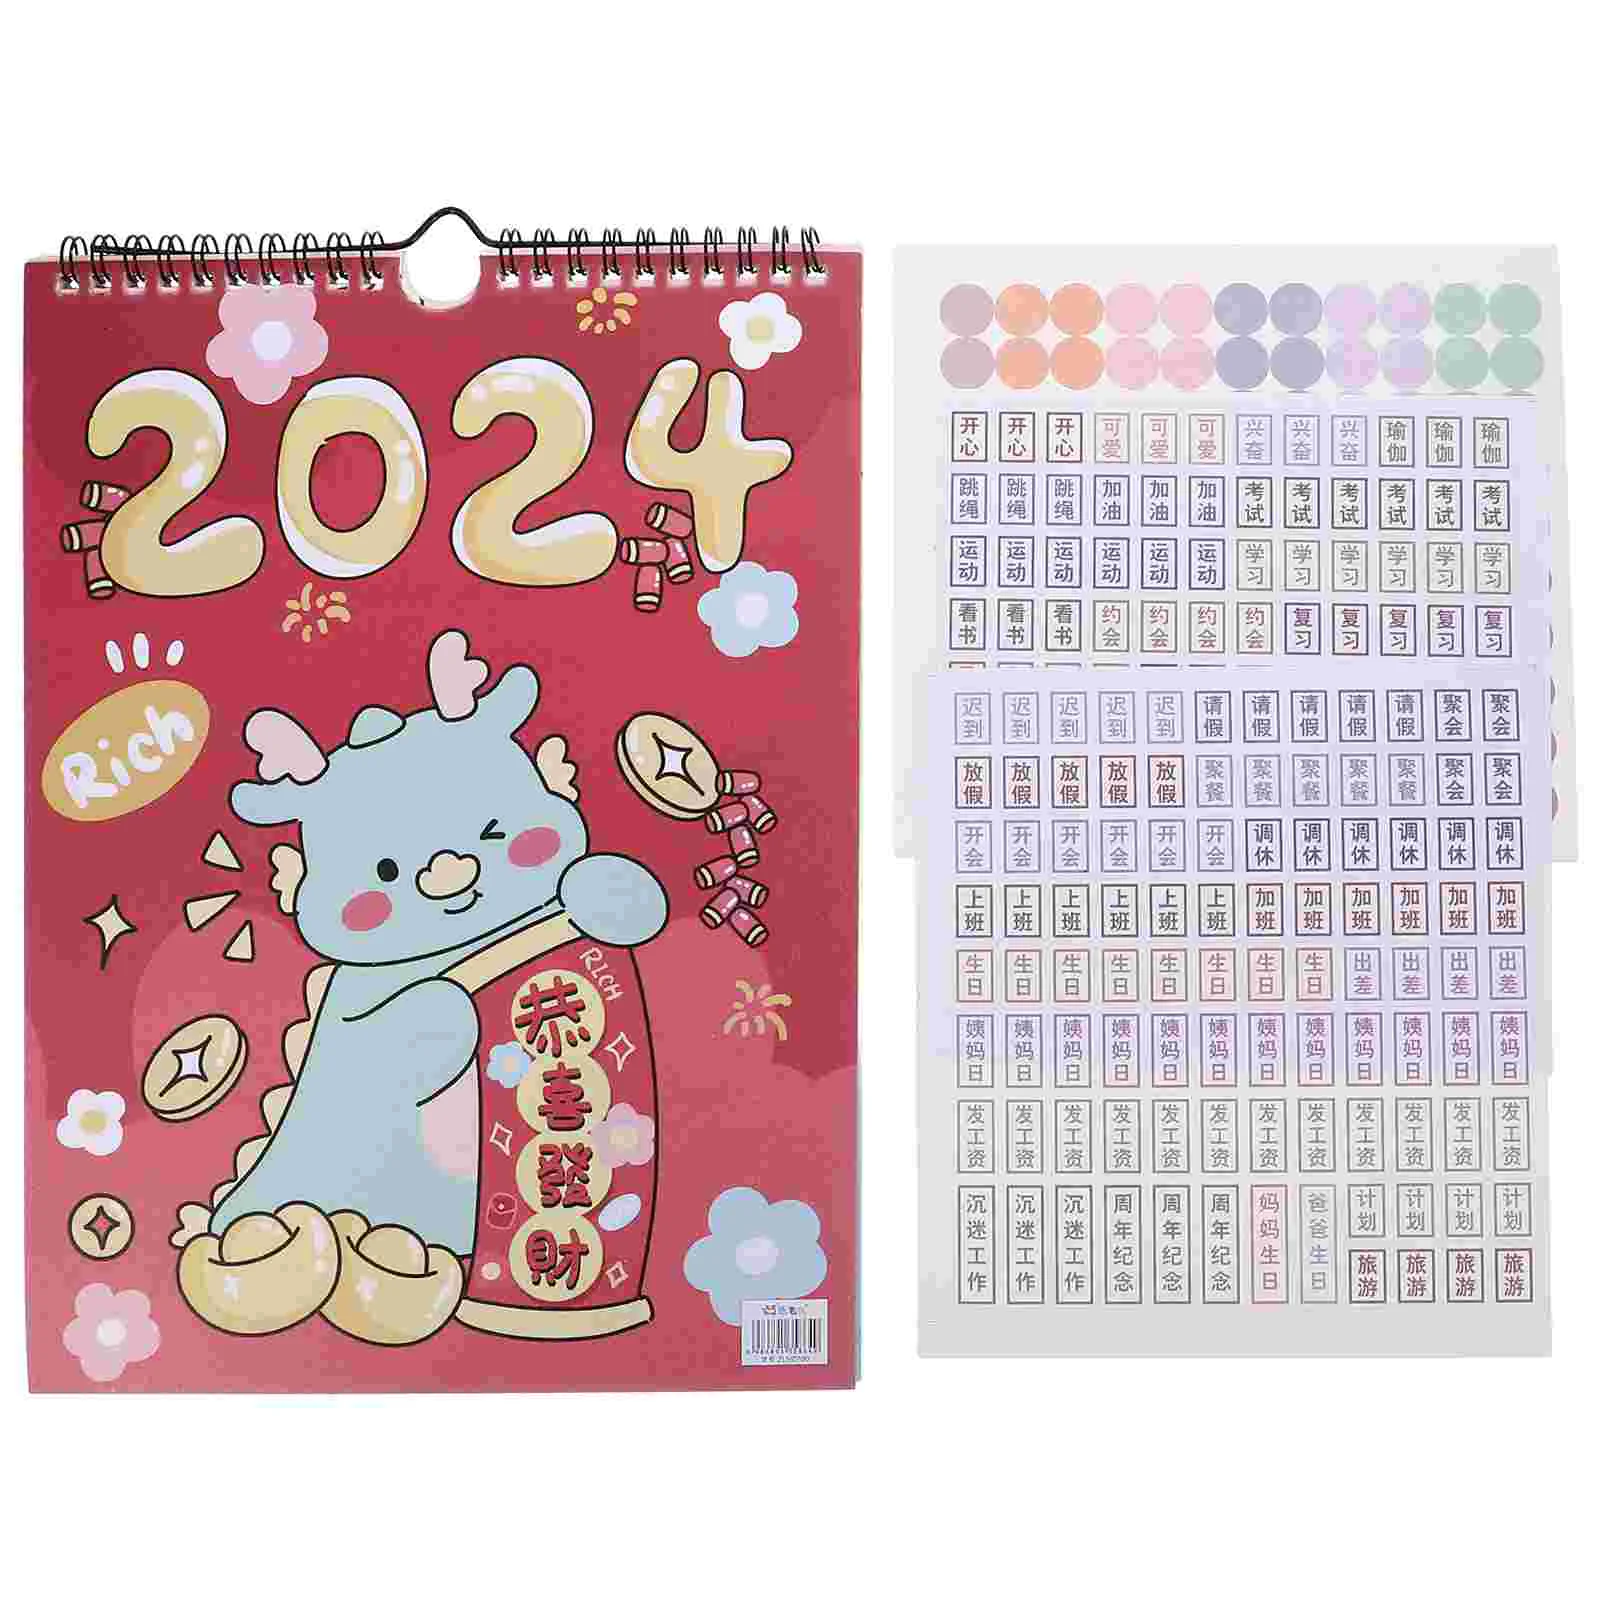 

1 Set of Wall Calendar Count Down Calendar Hanging Calendar Monthly Noting Calendar for Appointment